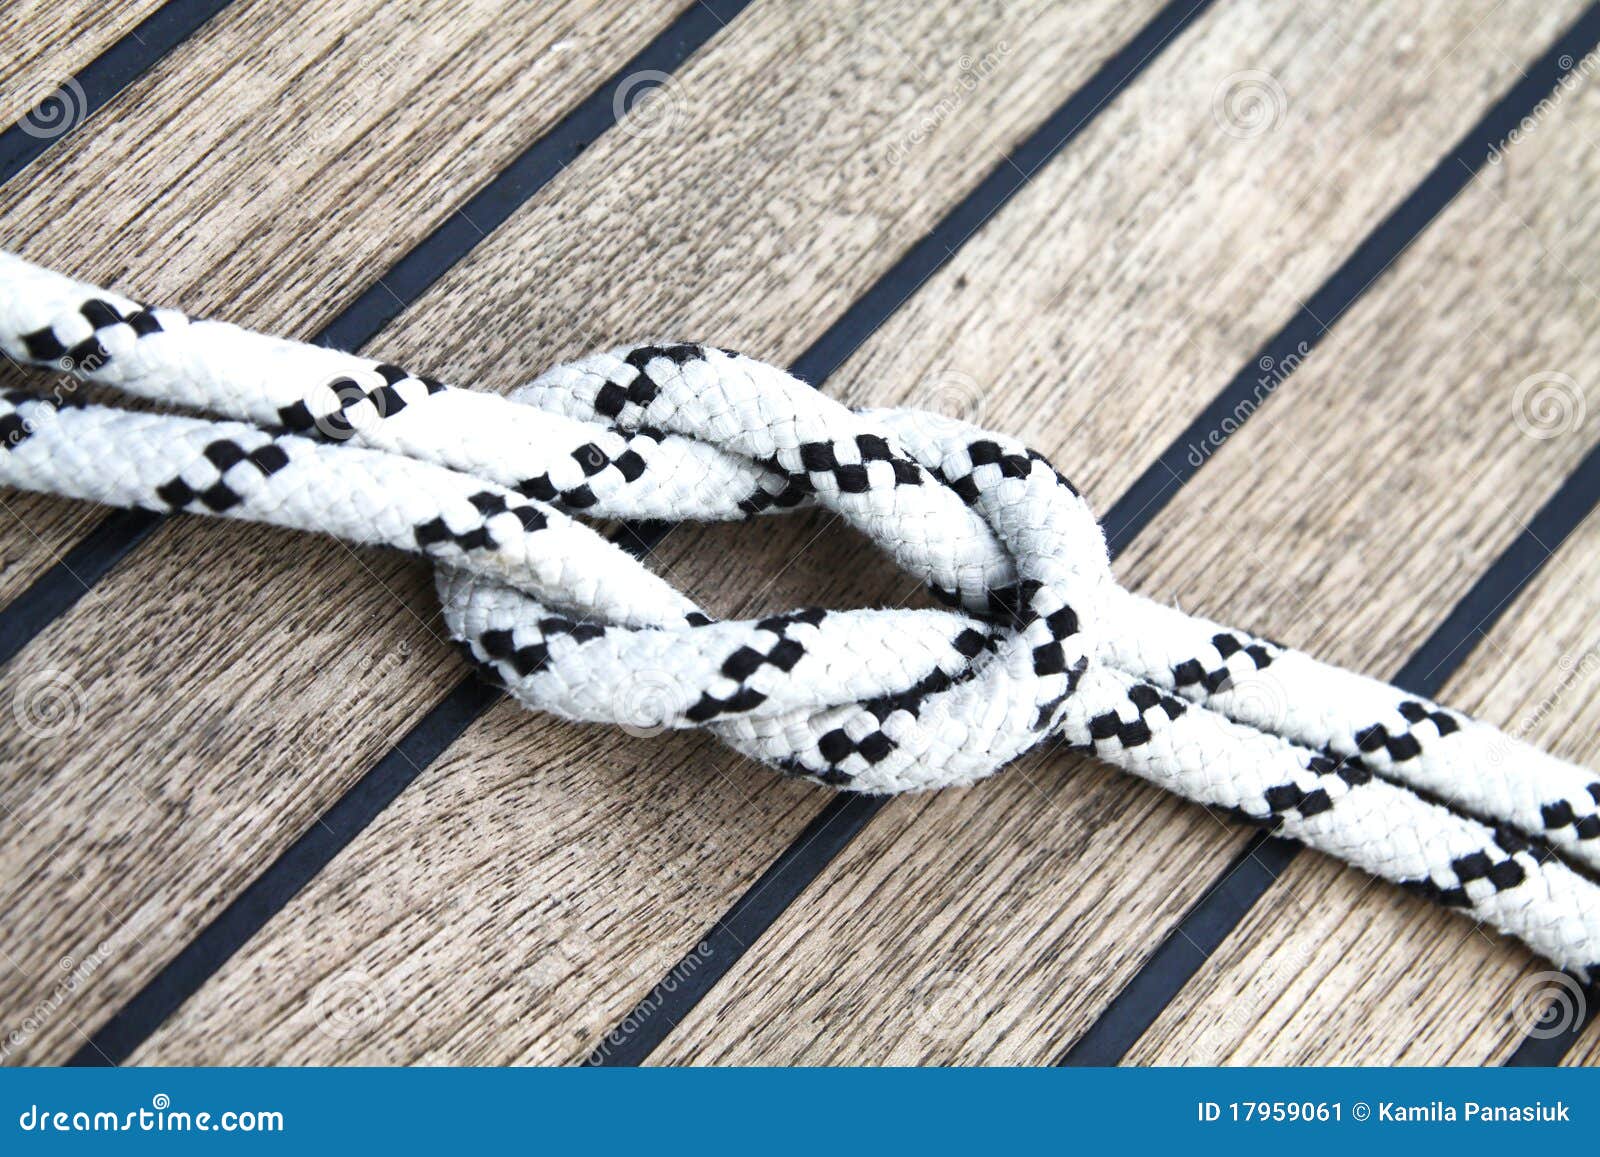 White and Black Sailing Rope Stock Image - Image of calm, sail